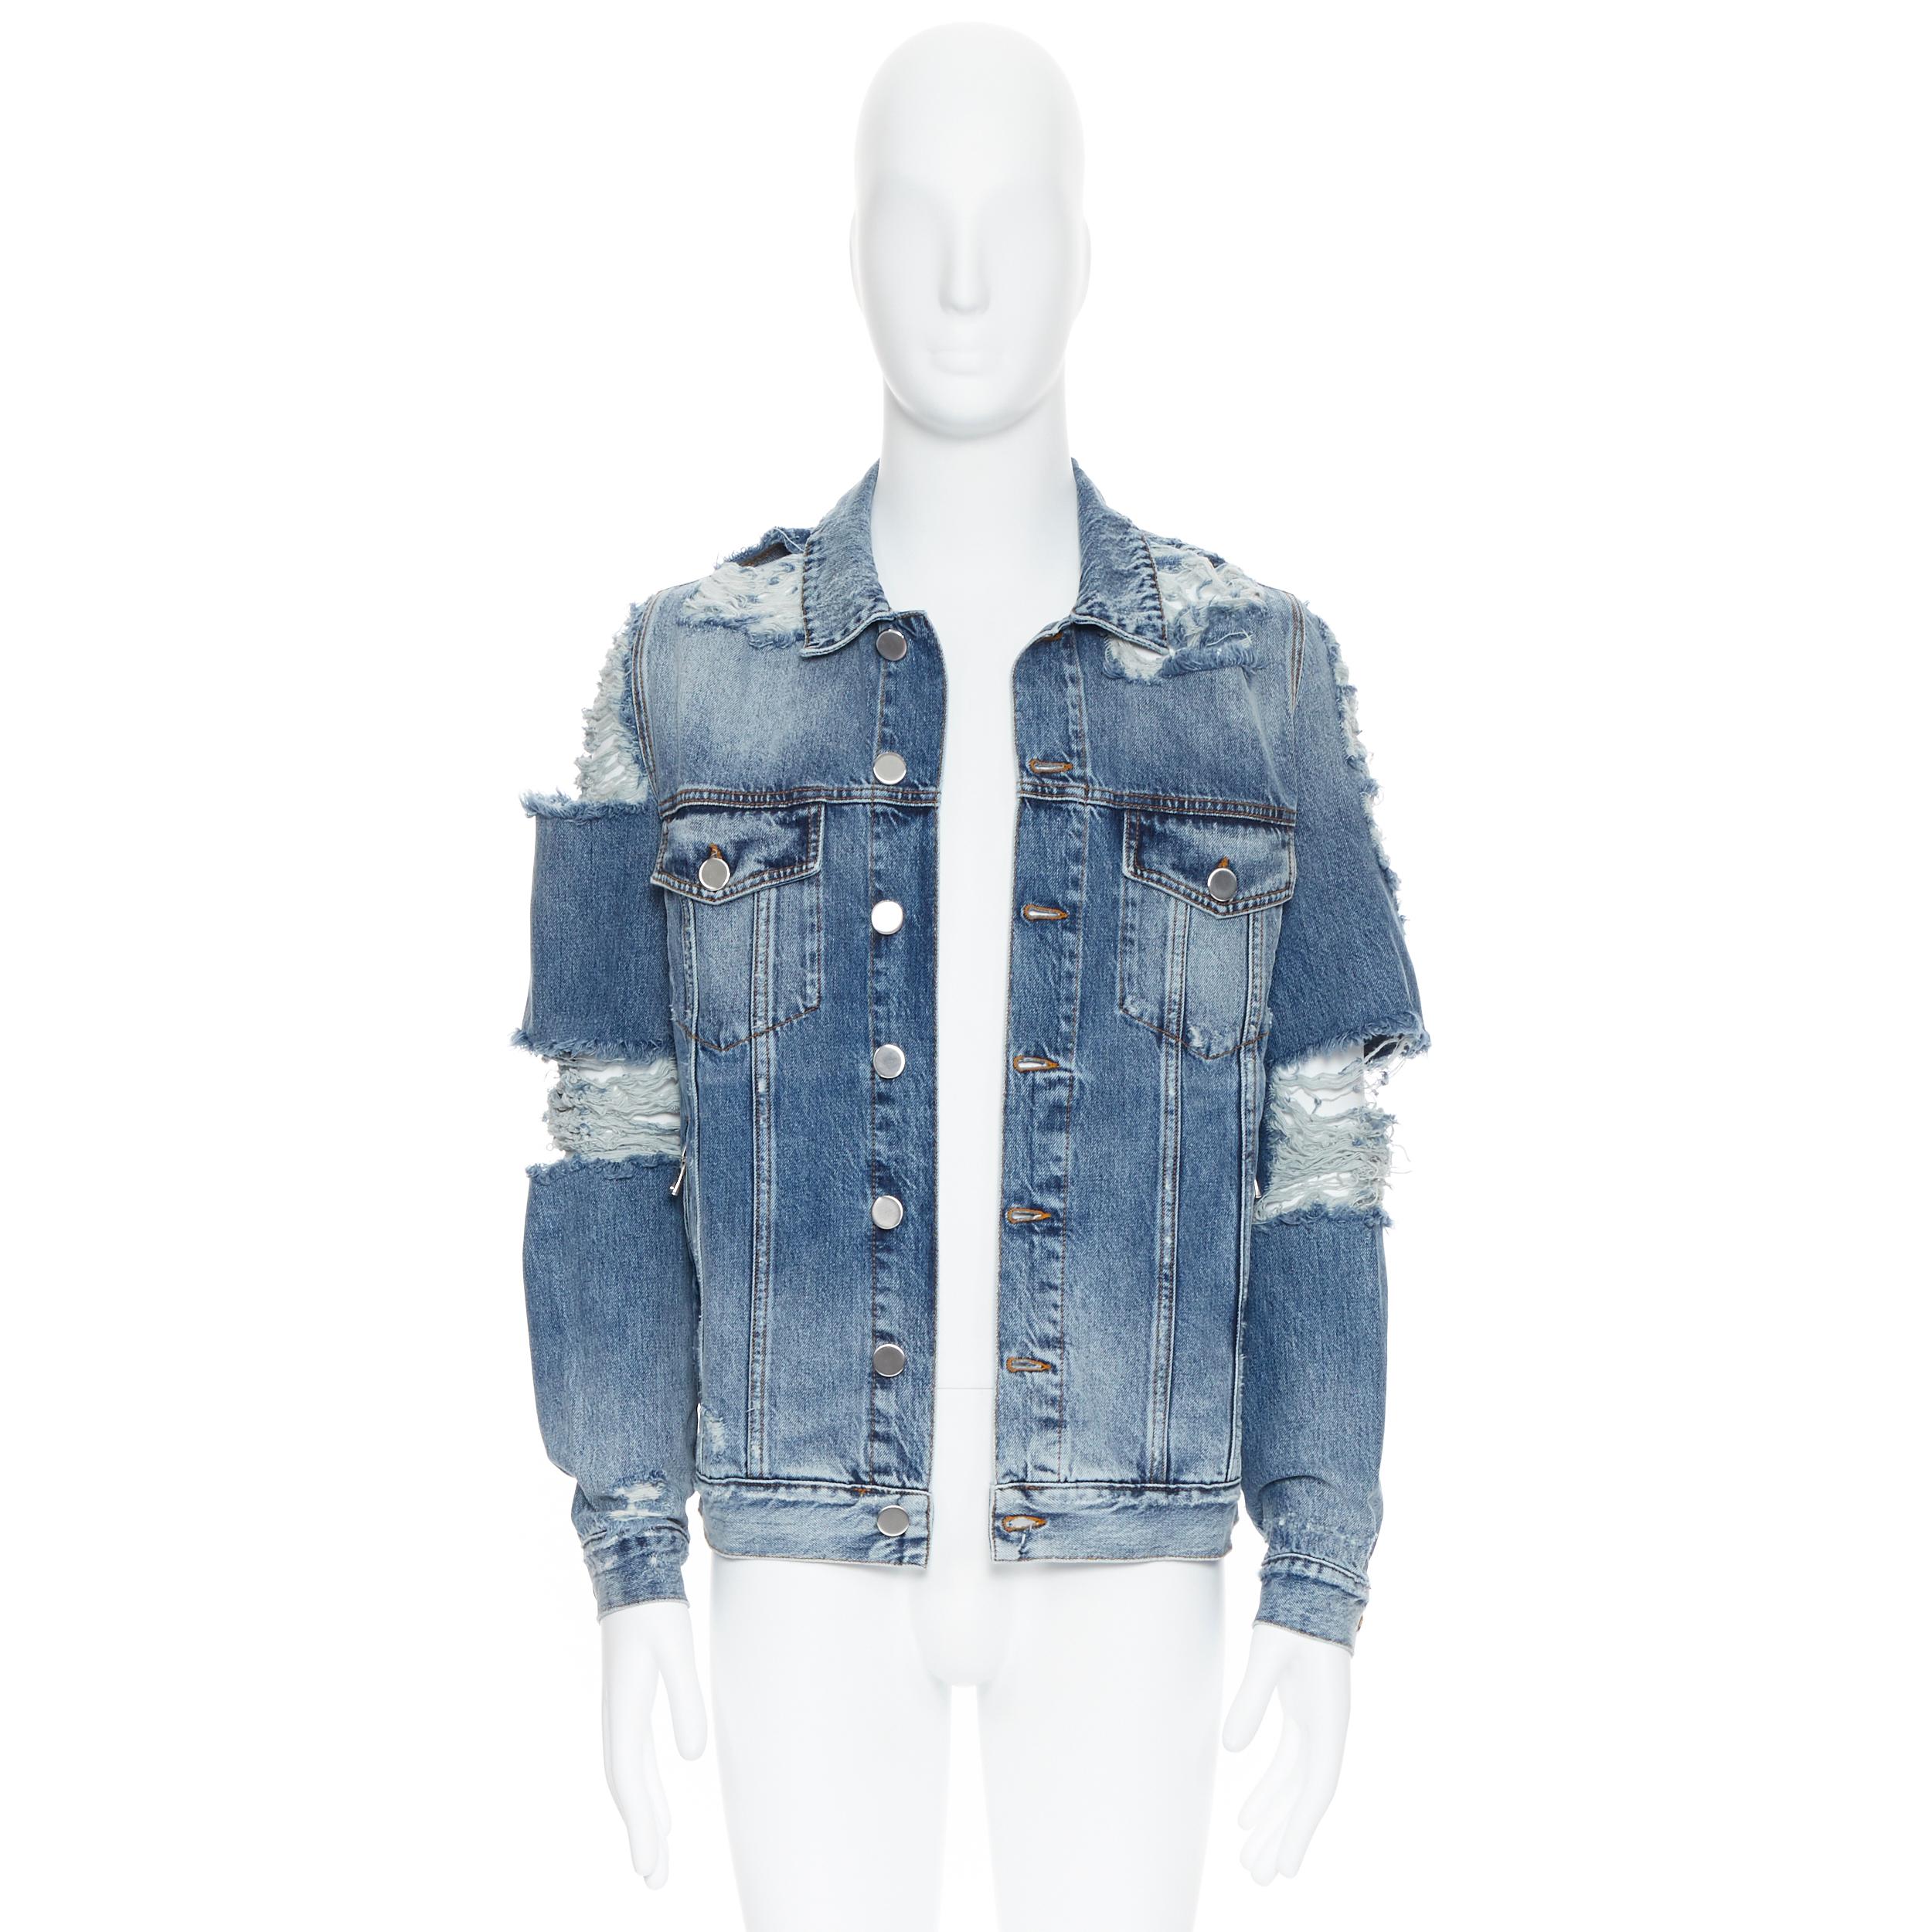 new BALMAIN blue washed heavy distressed shredded holey casual denim jacket S
Brand: Balmain
Designer: Olivier Rousteing
Model Name / Style: Denim jacket
Material: Cotton
Color: Blue
Pattern: Solid
Closure: Button
Extra Detail: BALMAIN style code: